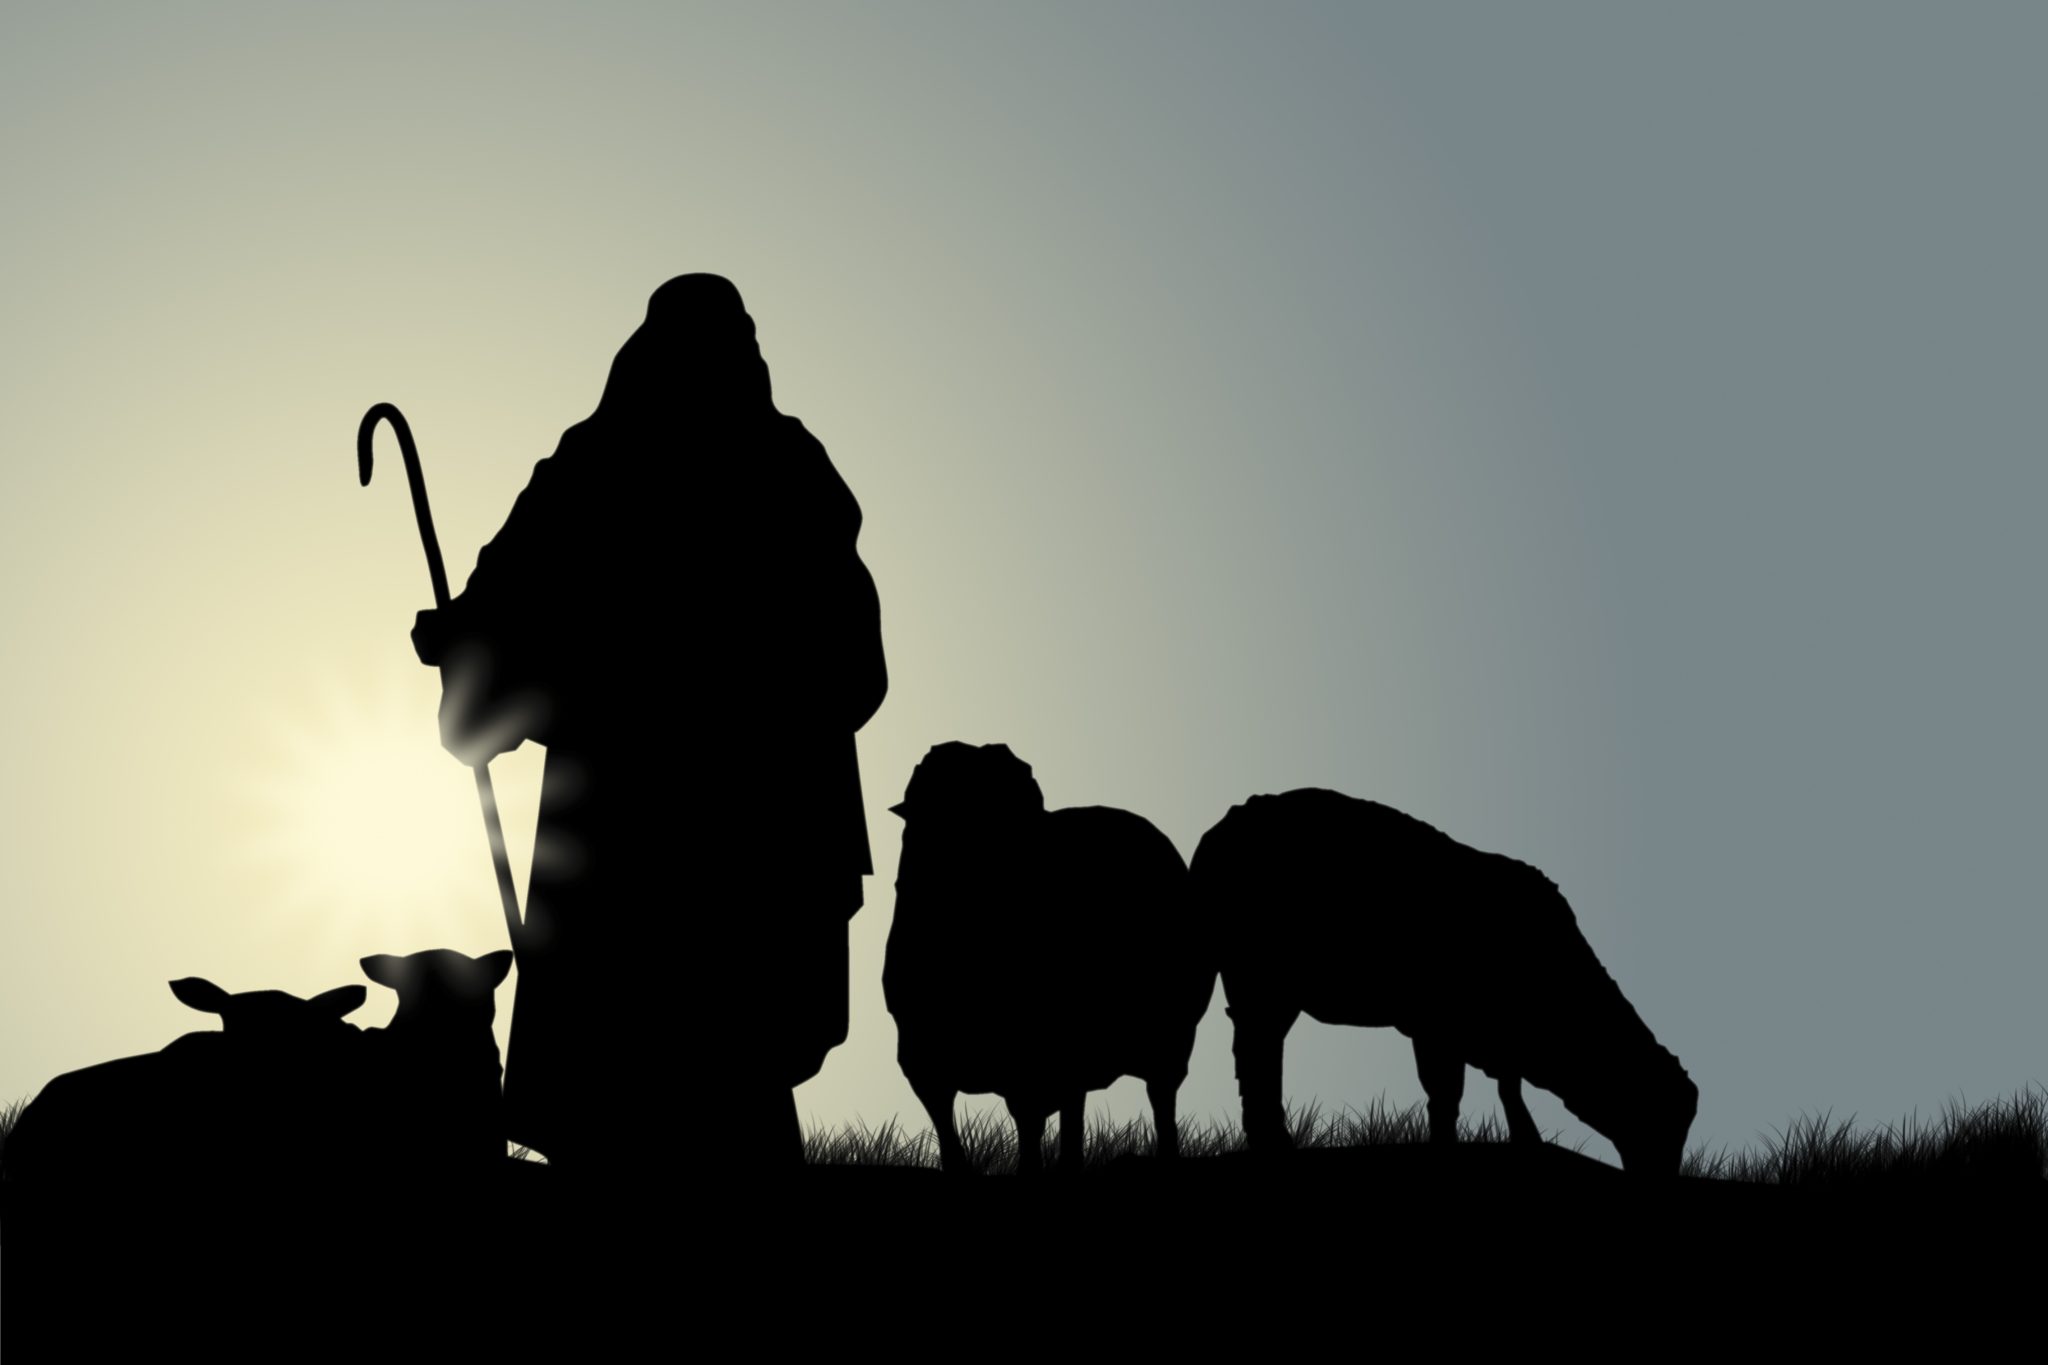 smite the shepherd and the sheep will be scattered meaning